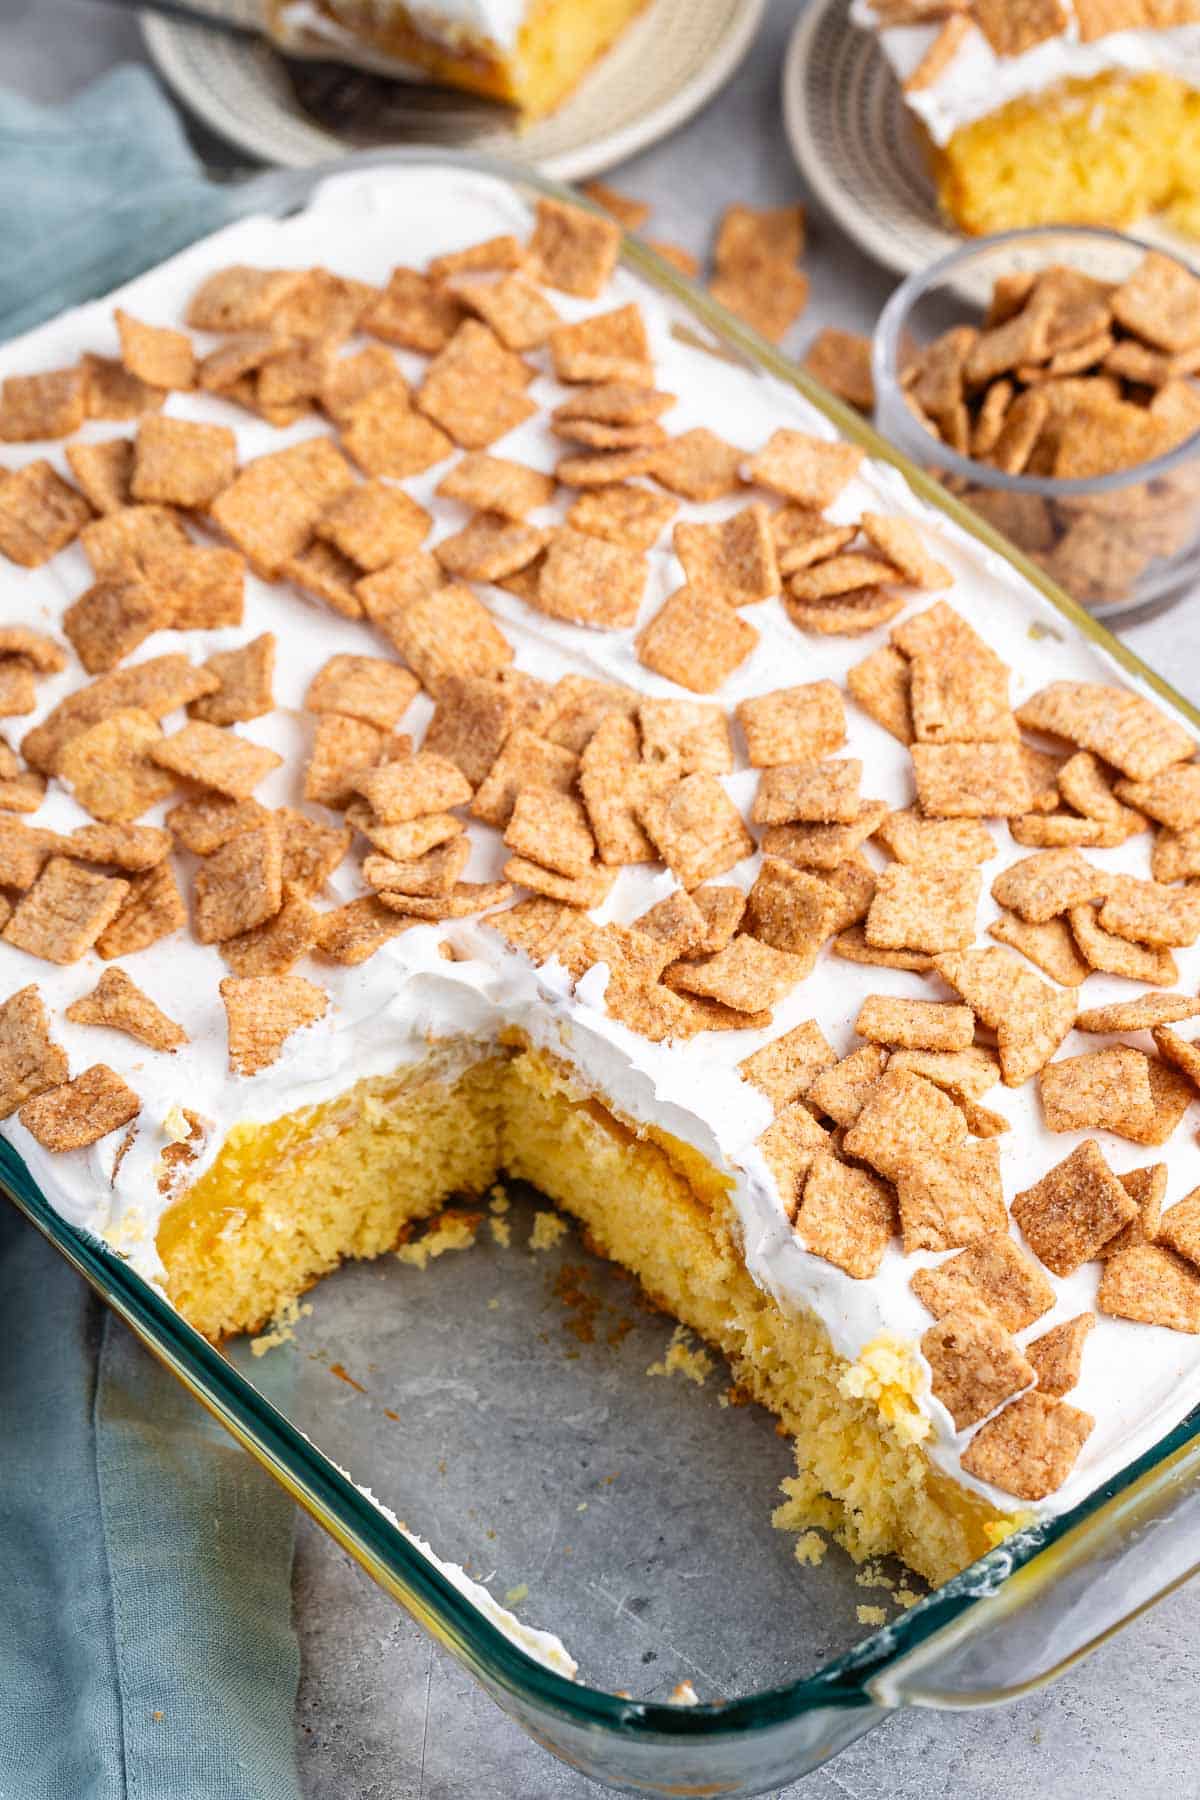 cake with white frosting and cinnamon toast crunch on top.